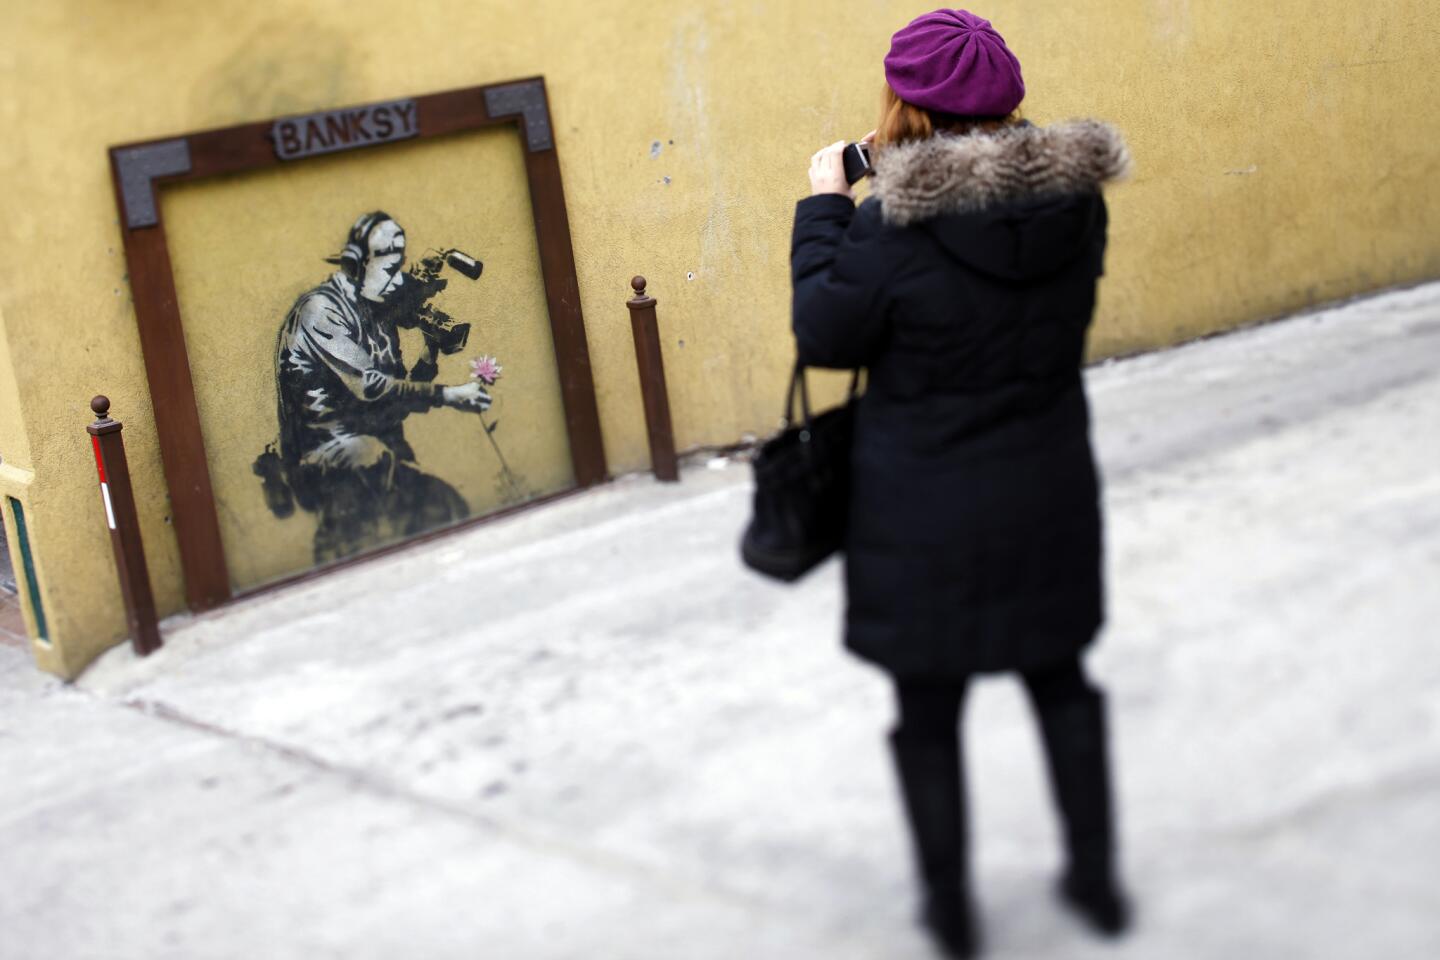 A passerby takes a picture of a Banksy piece of artwork left behind from his 2010 appearance in the festival.